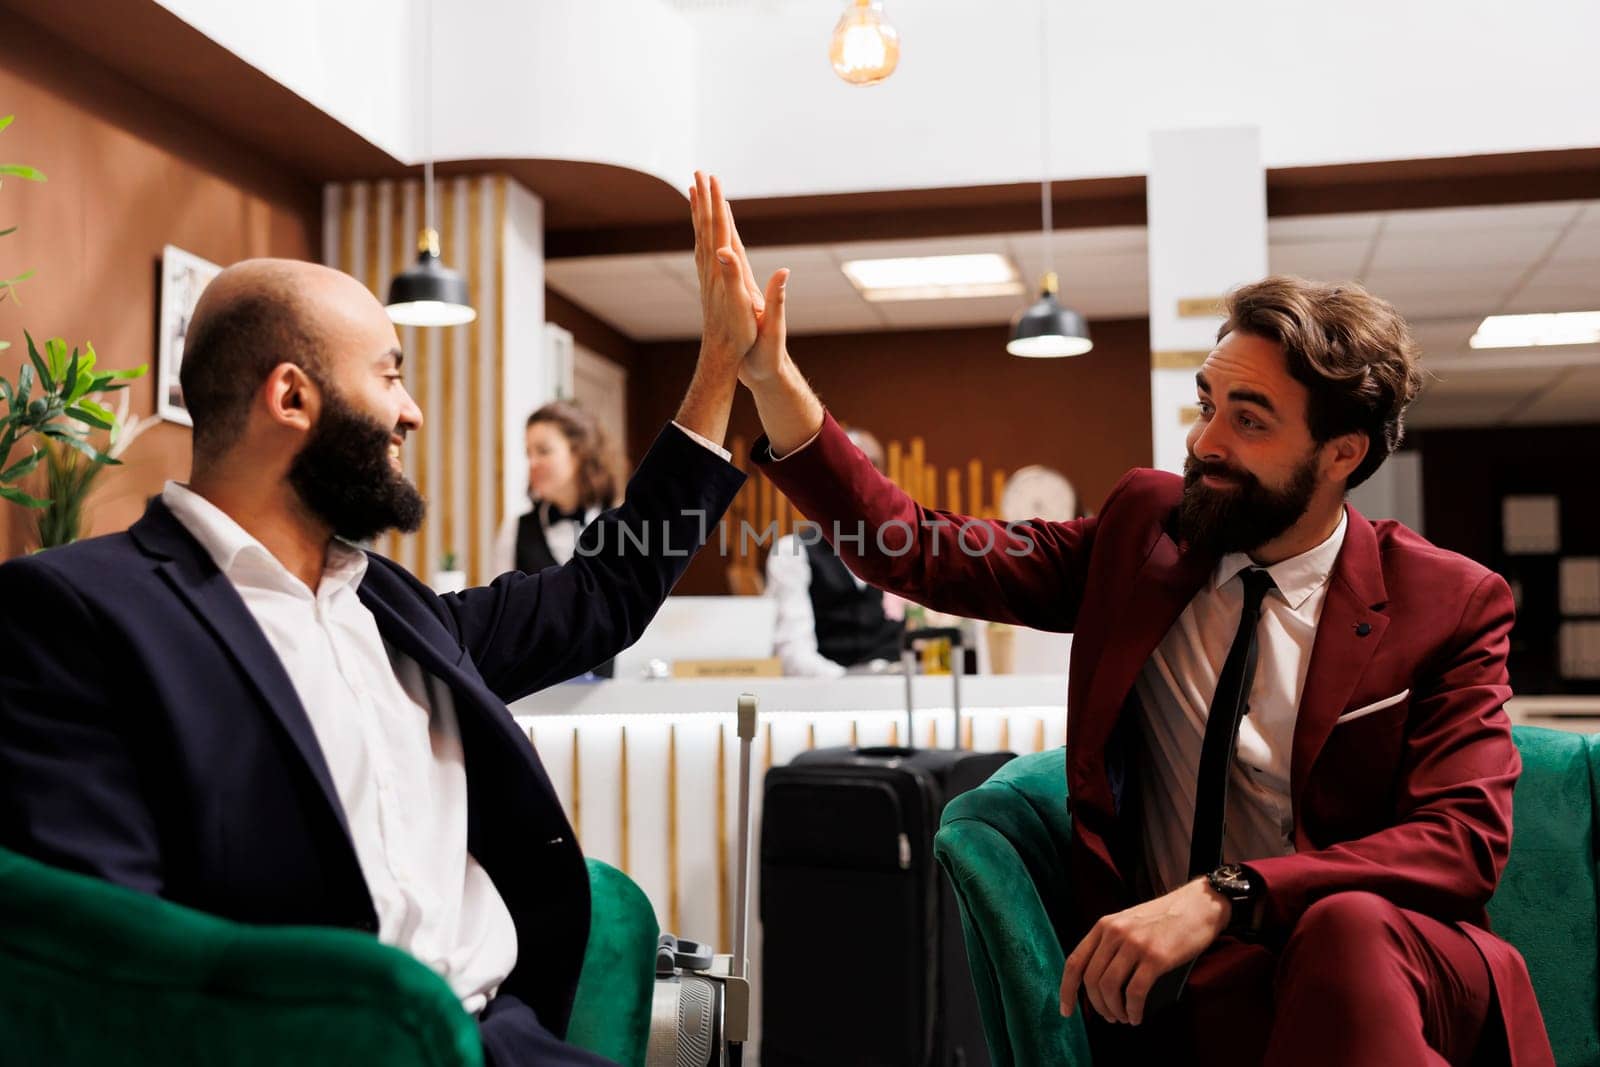 Business people team does highfive after successful international meeting, creating new corporate connections for development. Partners enjoying agreement, teamwork in hotel lobby.